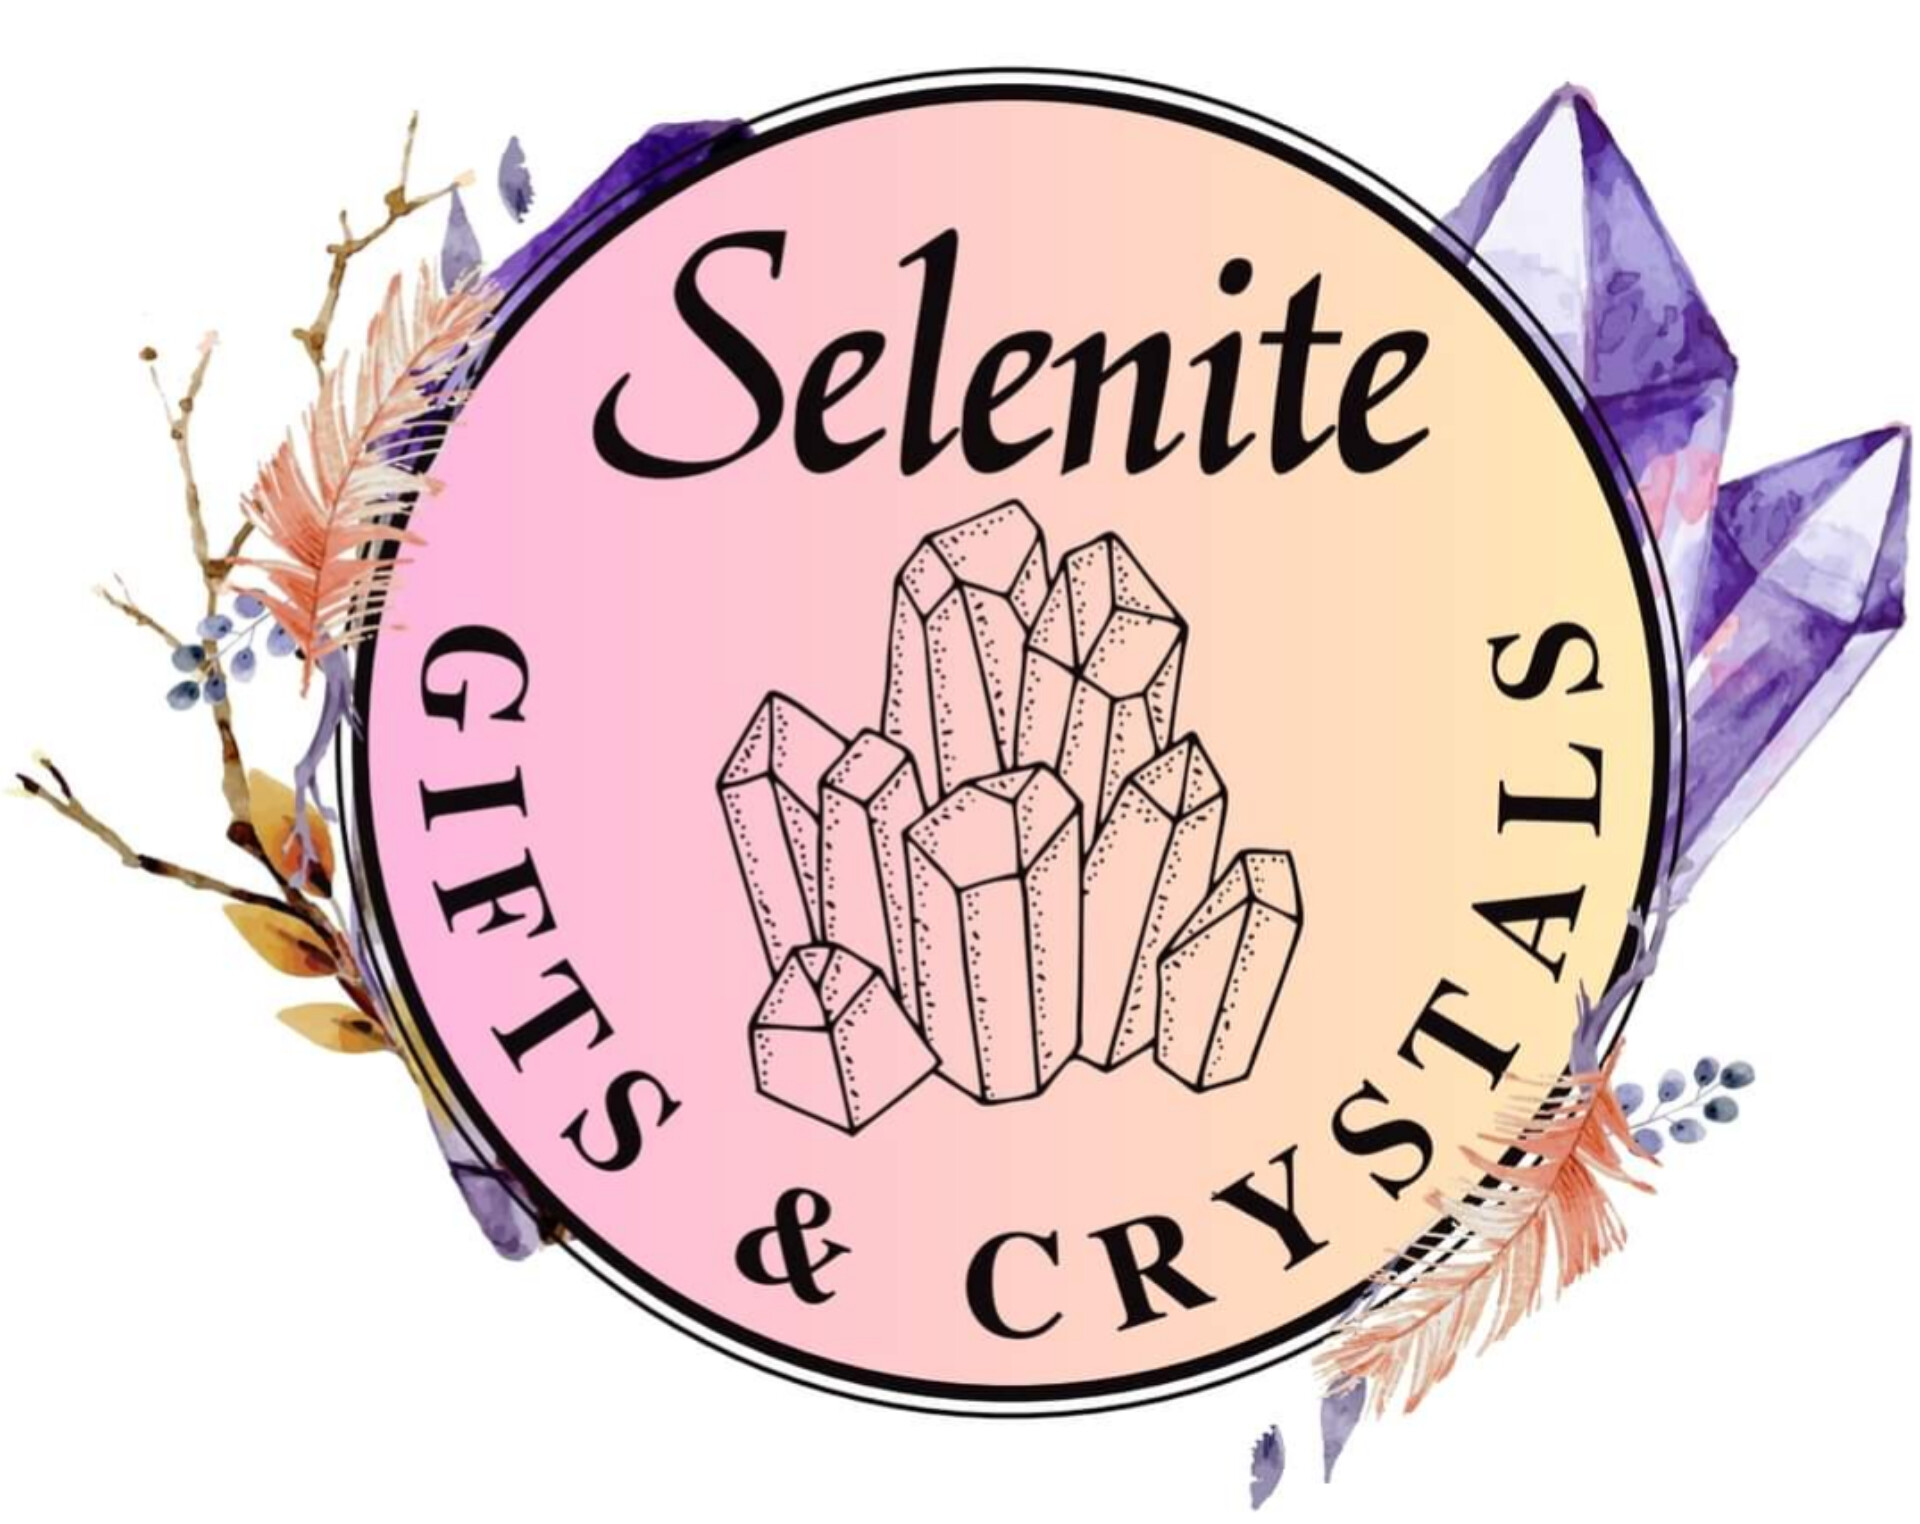 Selenite Gifts & Crystals